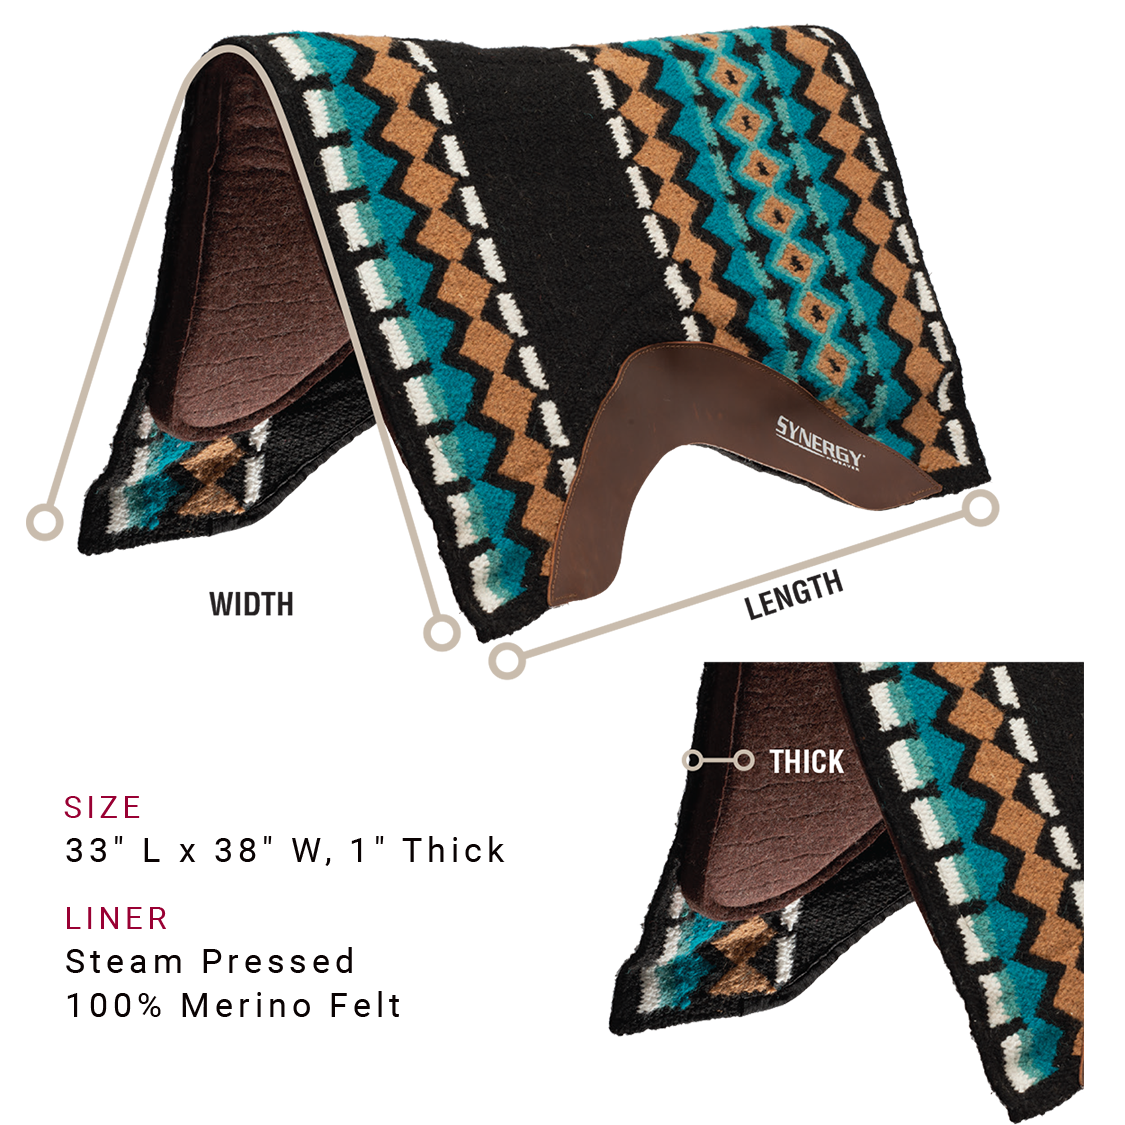 Saddle pad is available in the following sizes: 33 inches long by 38 inches wide, 1 inch thick. Saddle pad is available with a Steam pressed 100% merino felt liner